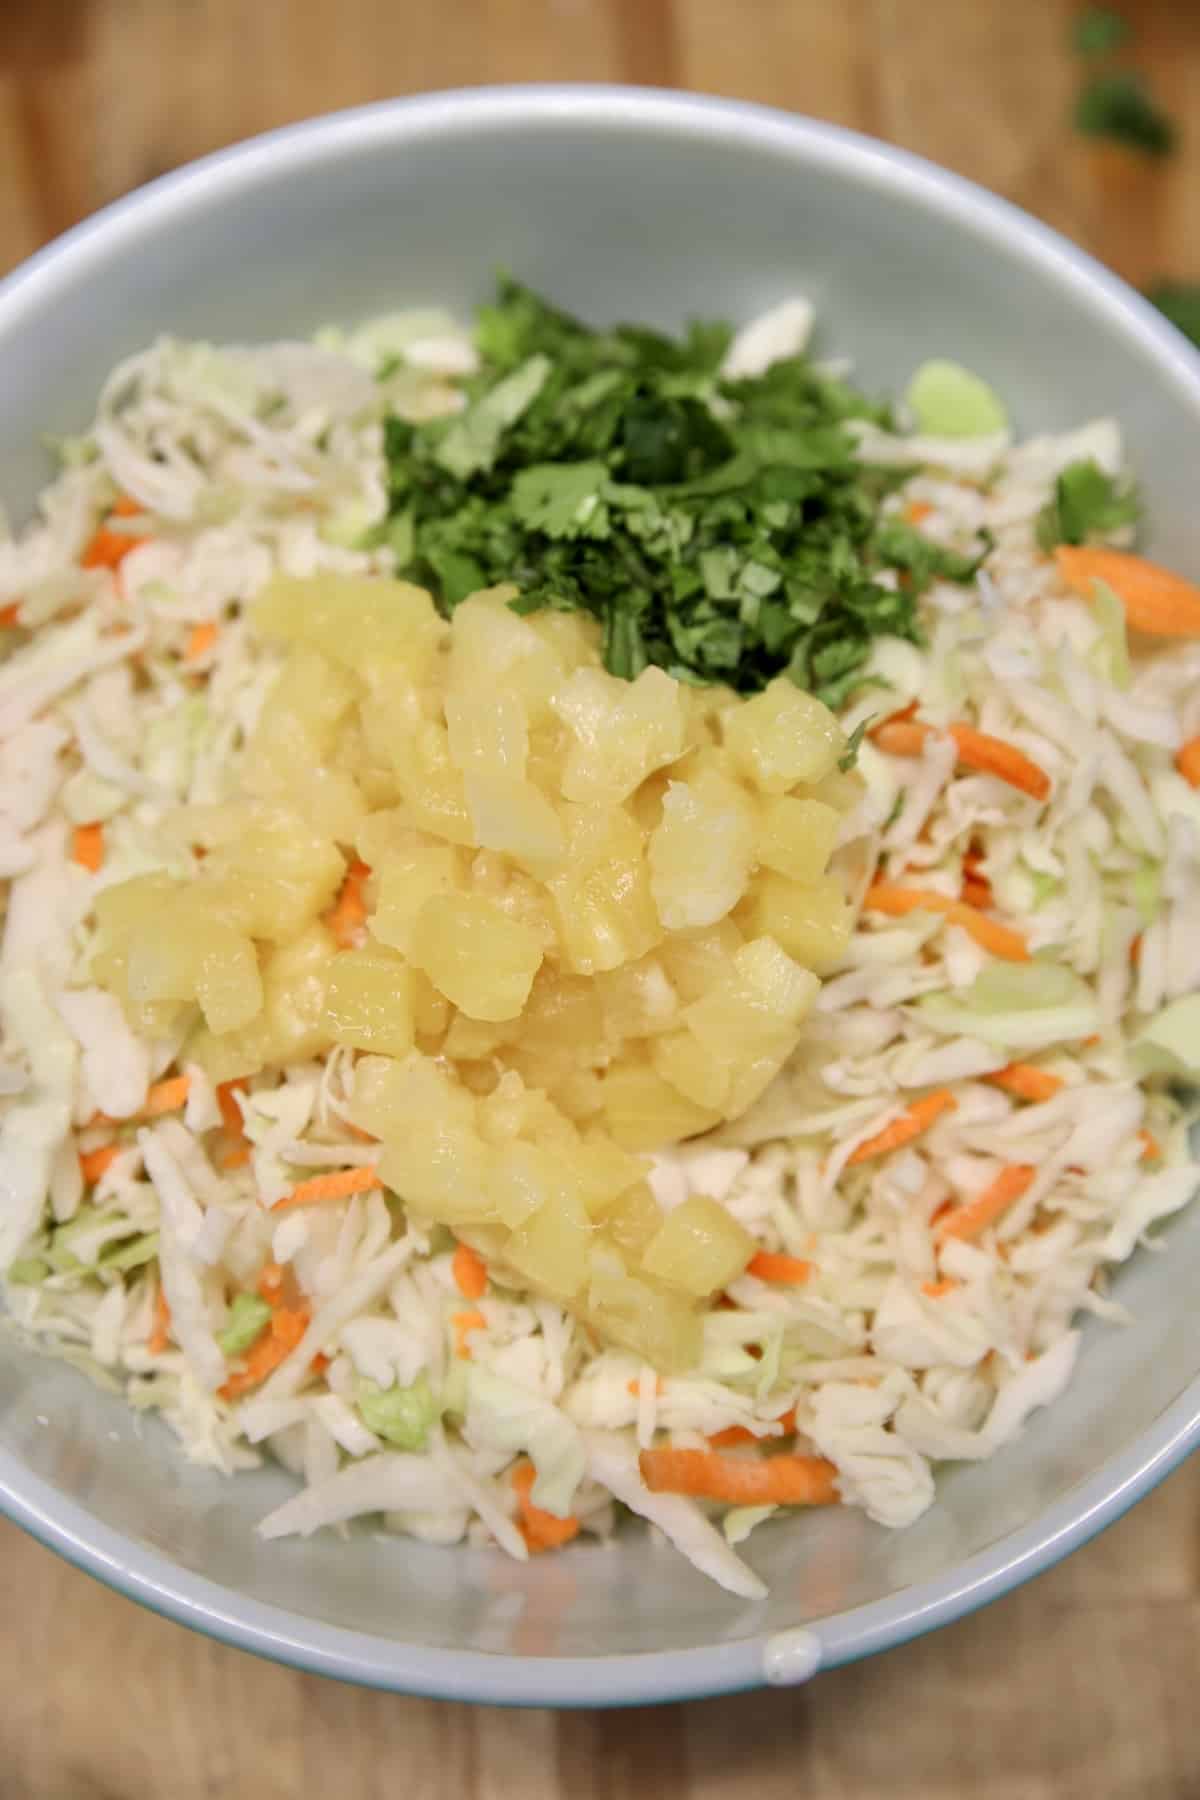 Bowl with shredded cabbage, carrots, pineapple and cilantro.